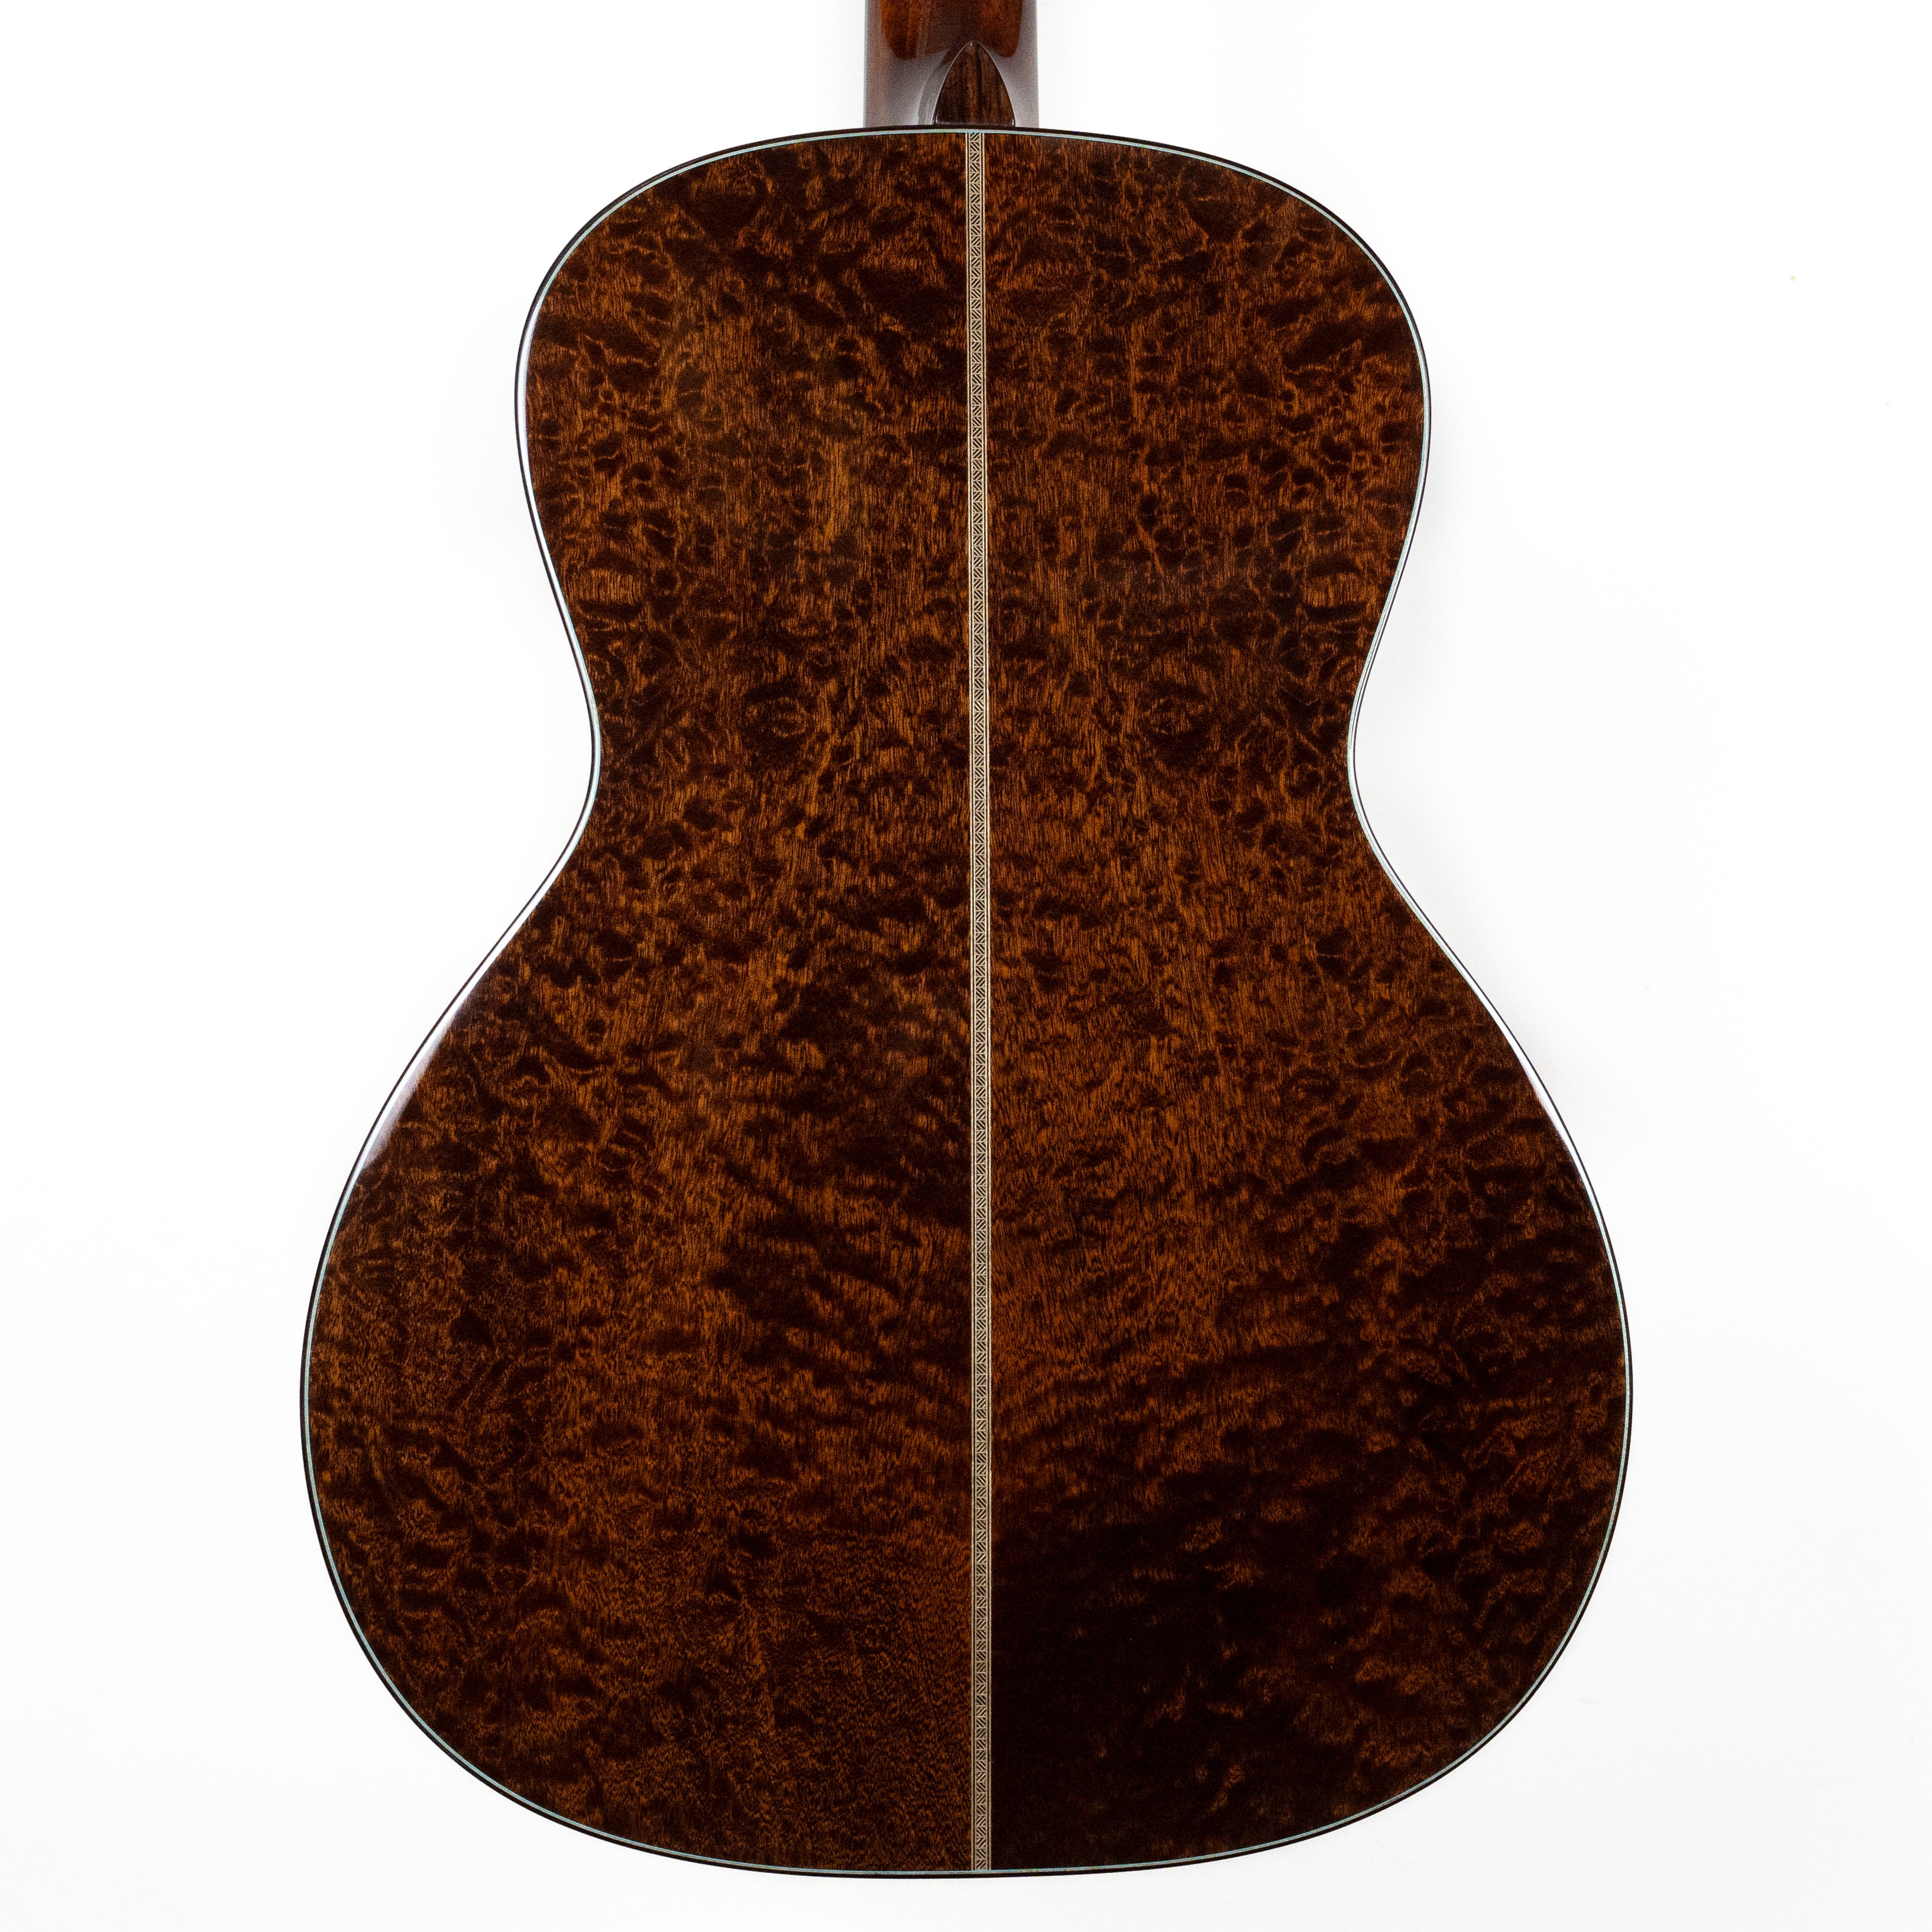 Eastman L-OOSS-QS European Spruce, Quilted Sapele